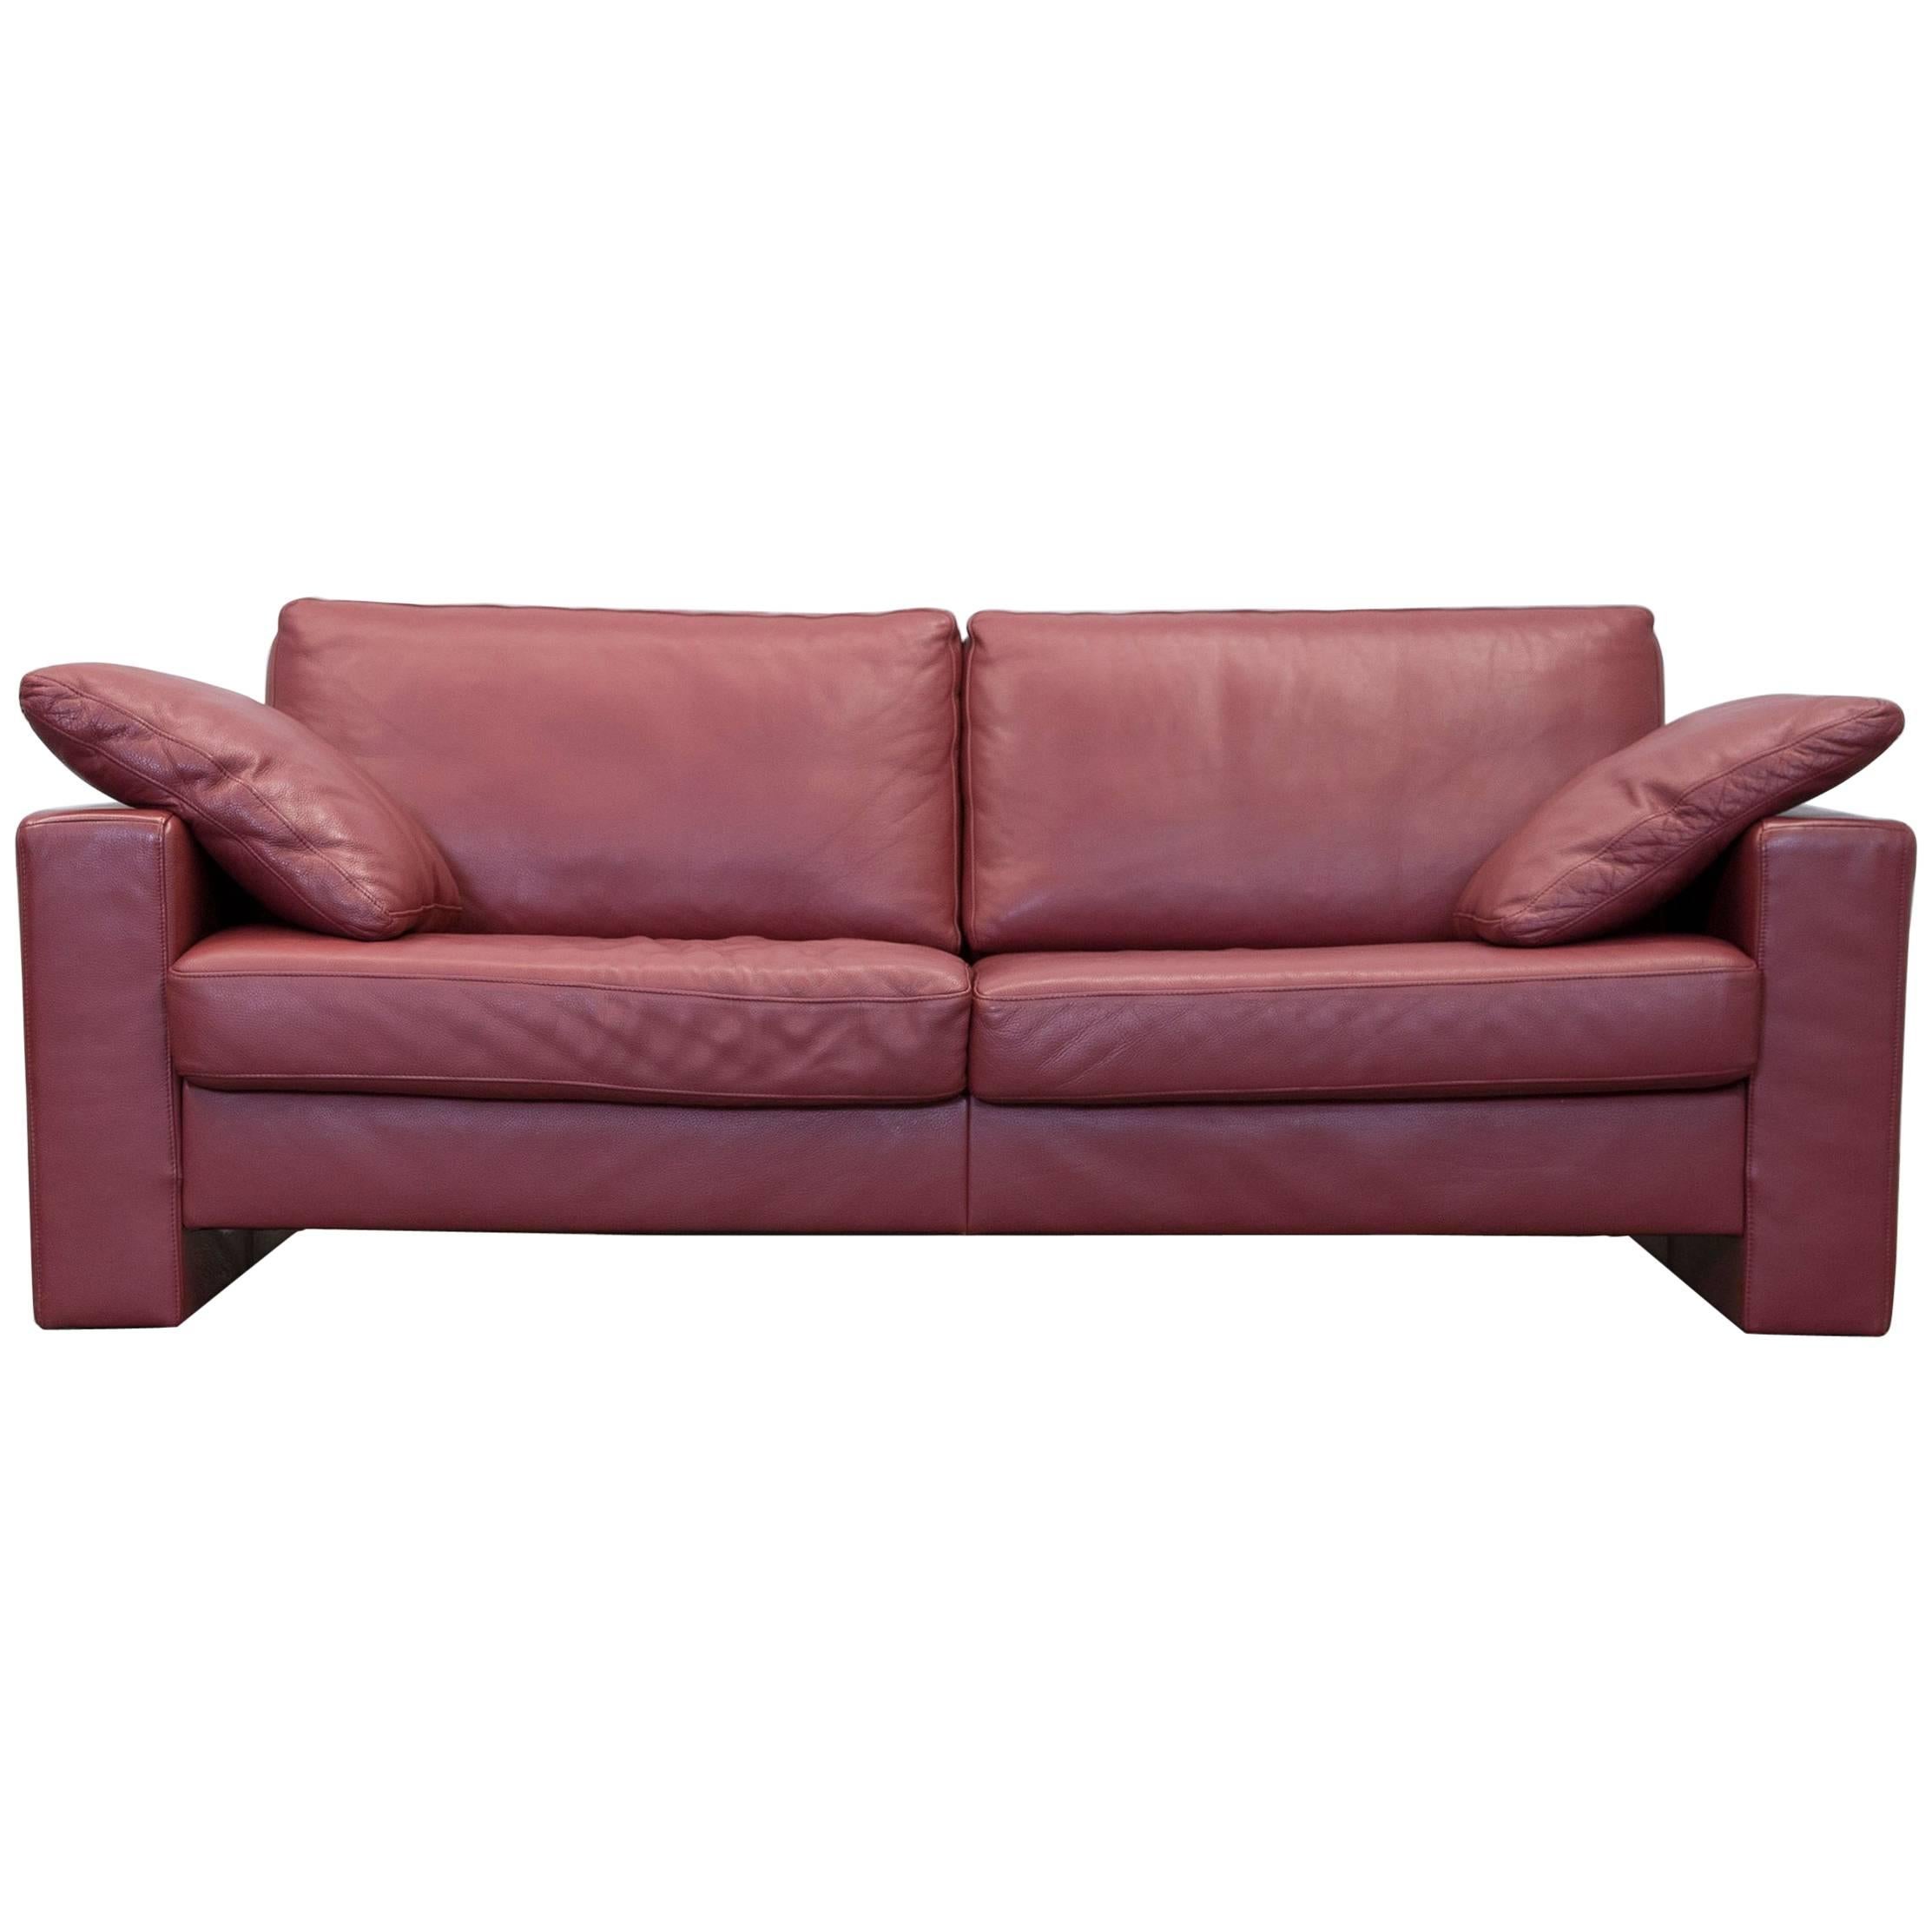 Ewald Schillig Designer Two-Seat Couch Leather Red Couch Modern